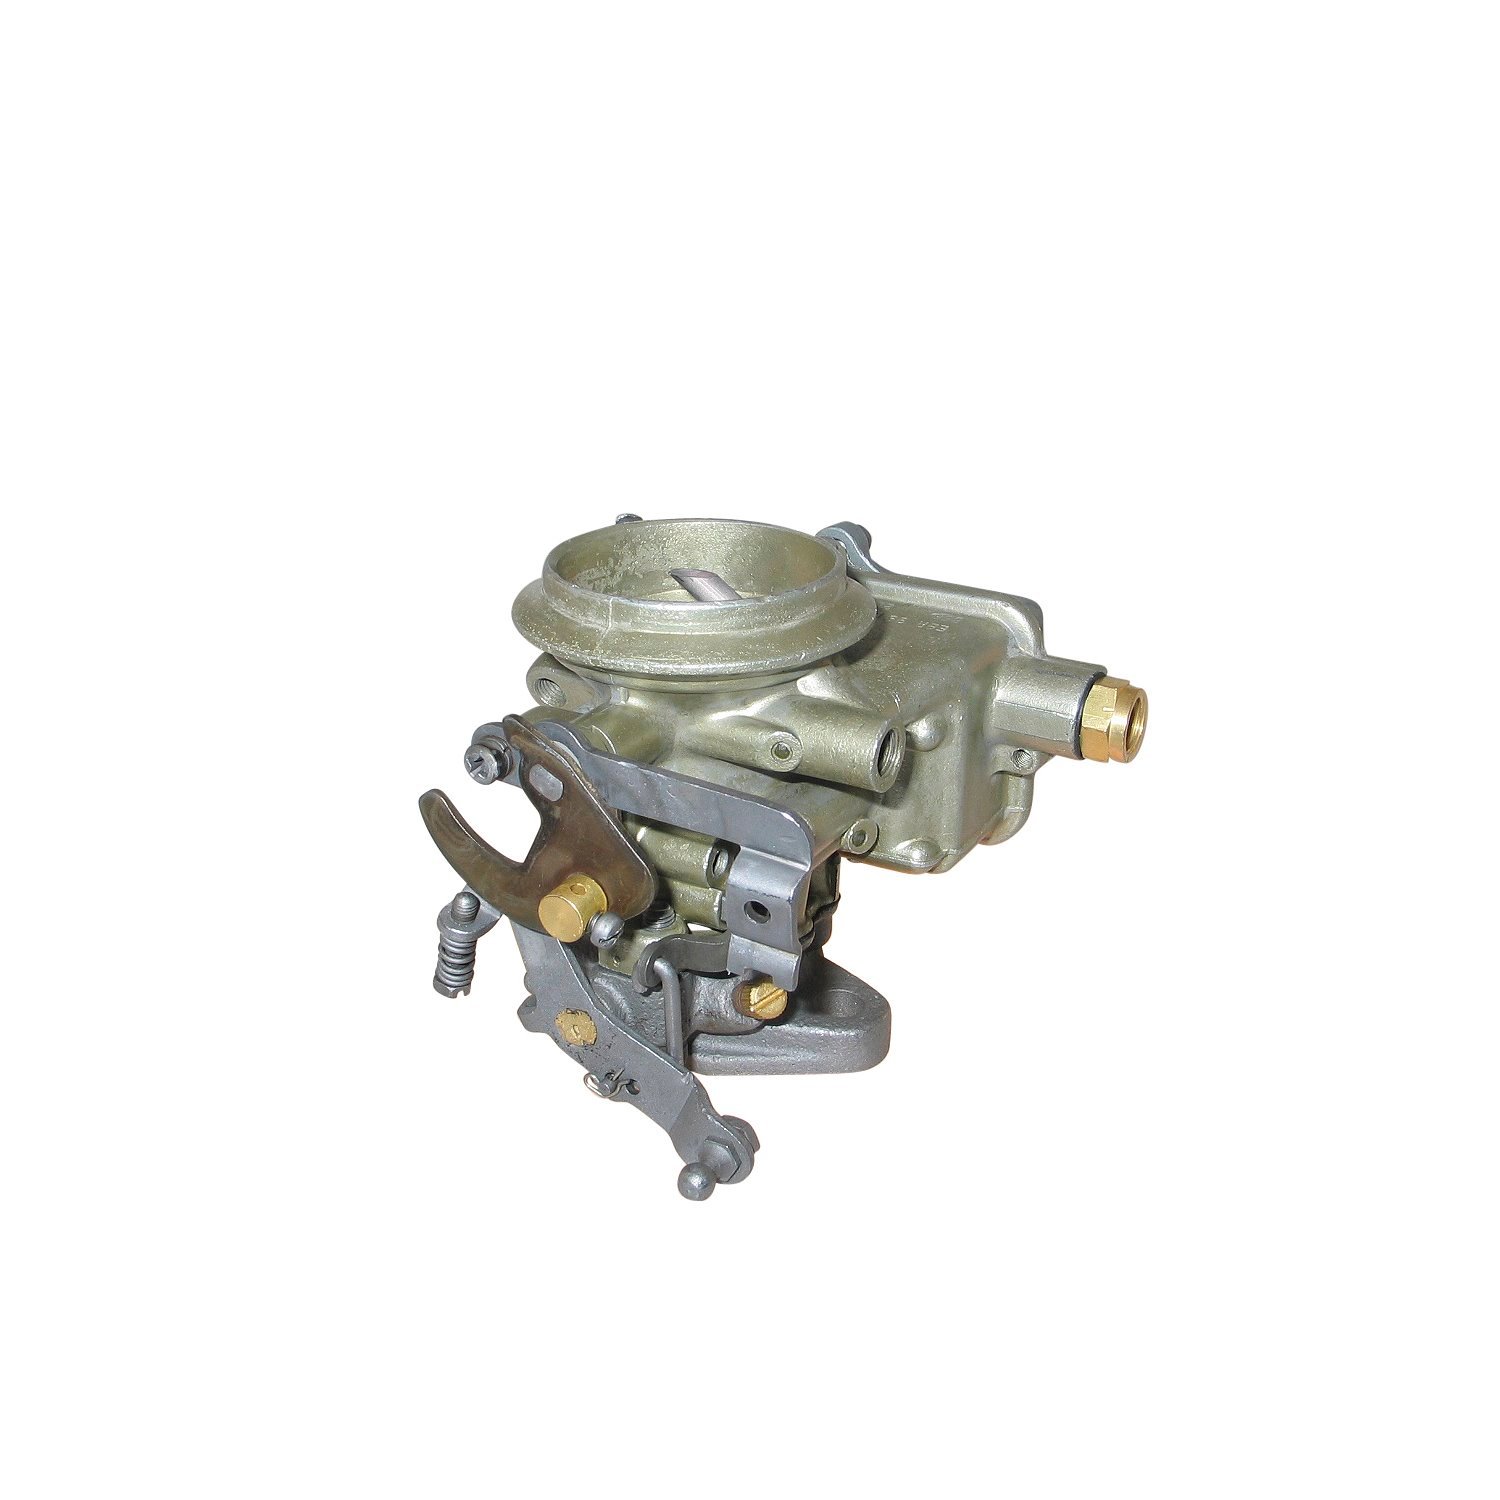 7-717 Holley Remanufactured Carburetor, 1920-Style